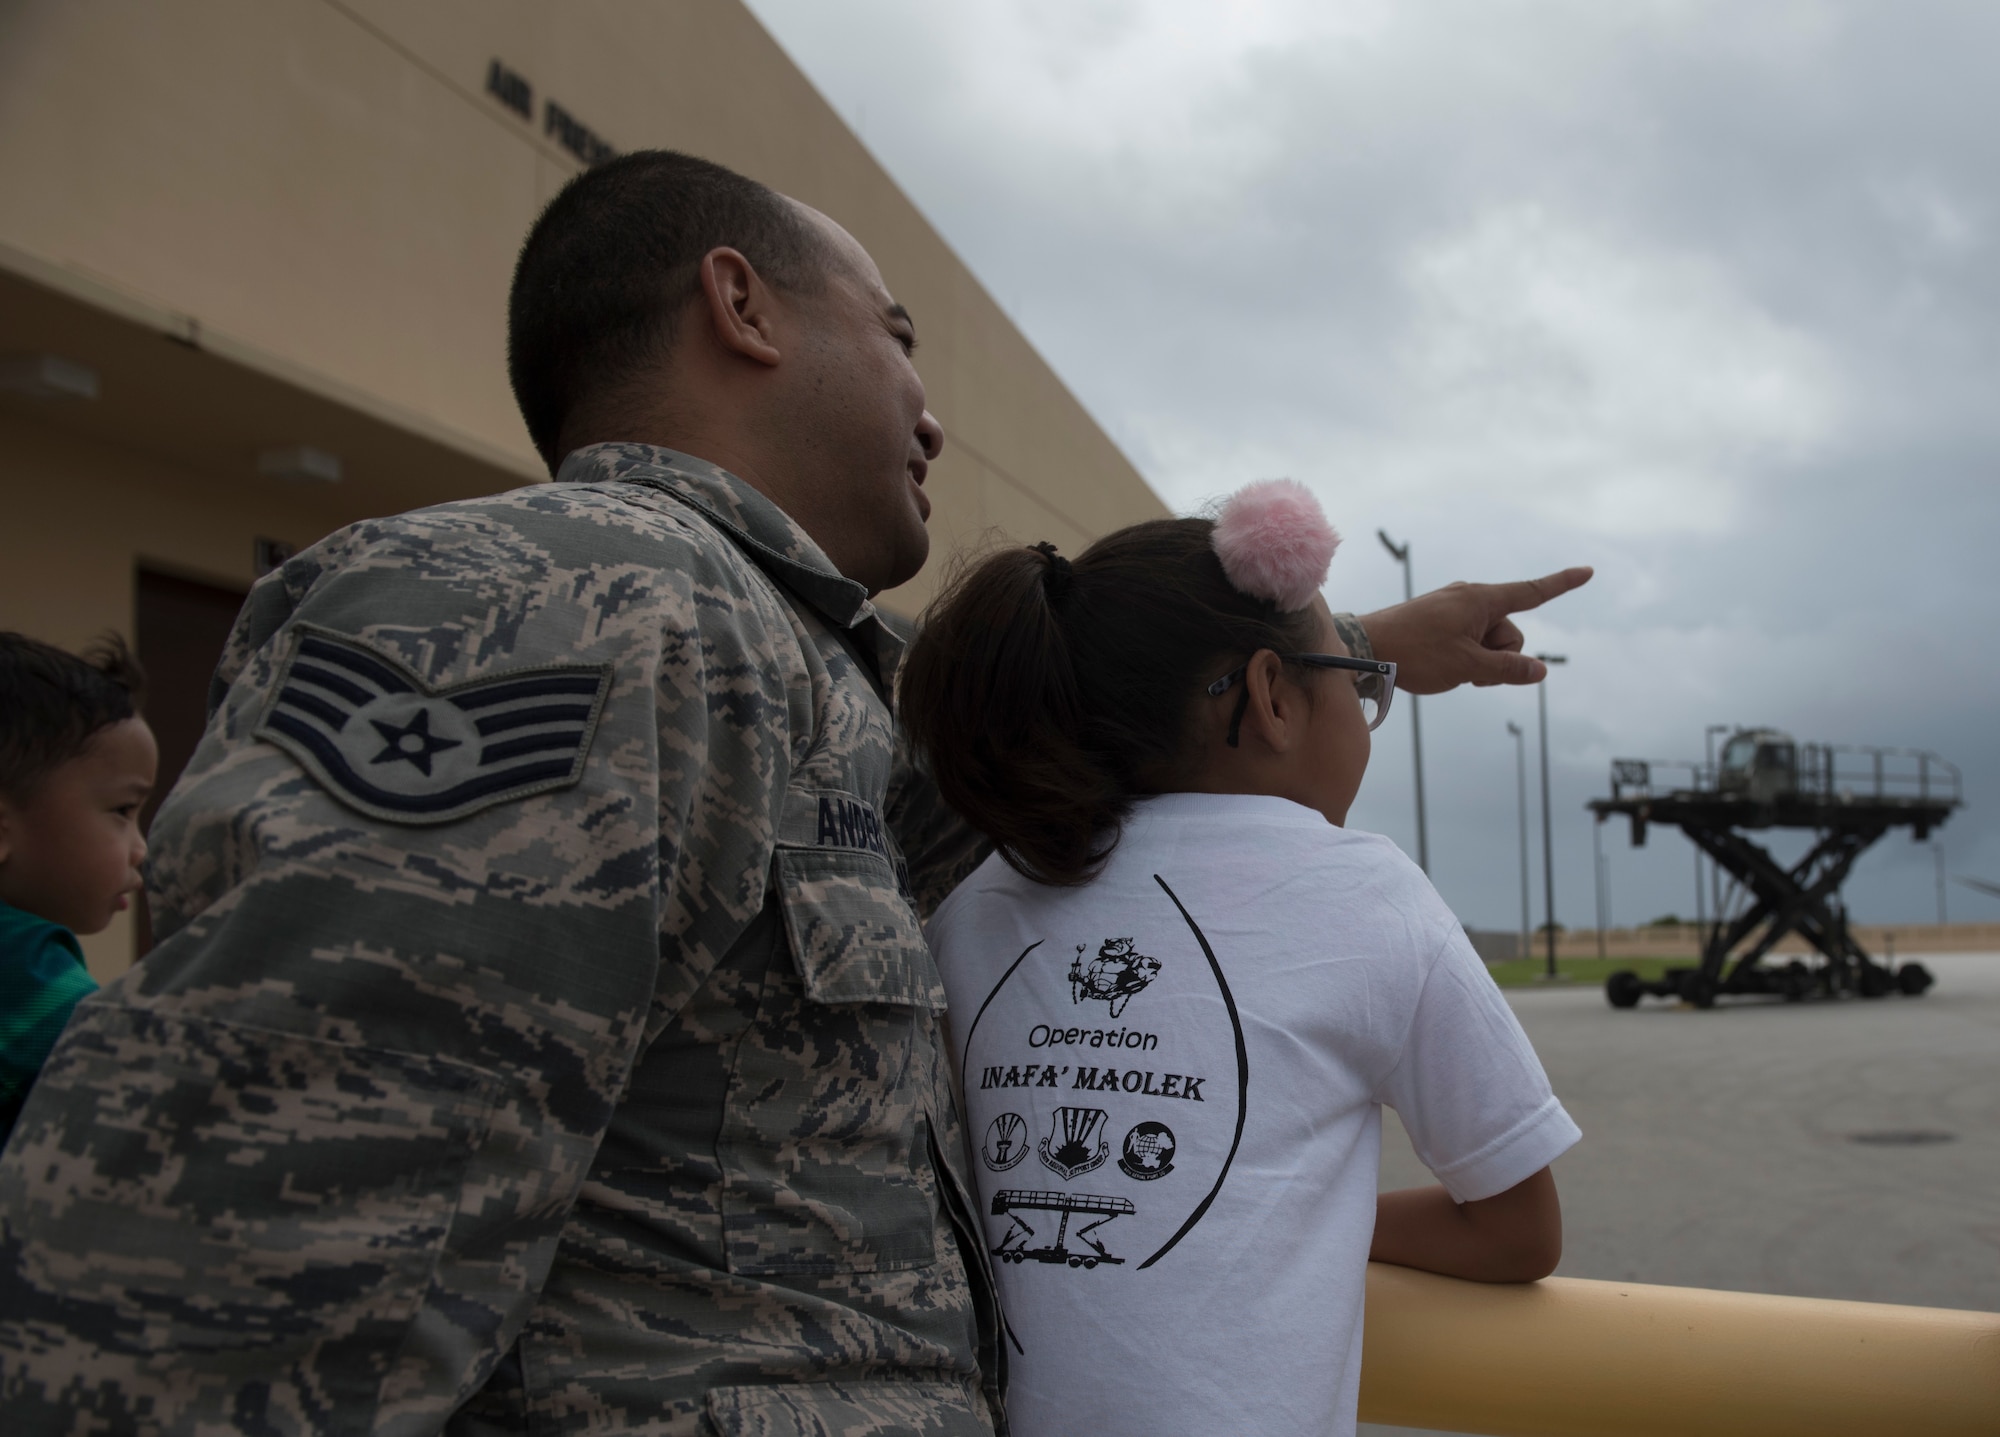 U.S. Air Force Staff Sgt. Joshua Anderson, left, assigned to the U.S. Air Force Reserve’s 44th Aerial Port Squadron, watches an aerial port equipment demonstration with military children during Operation Inafa’ Maolek at Andersen Air Force Base, May 5, 2018.